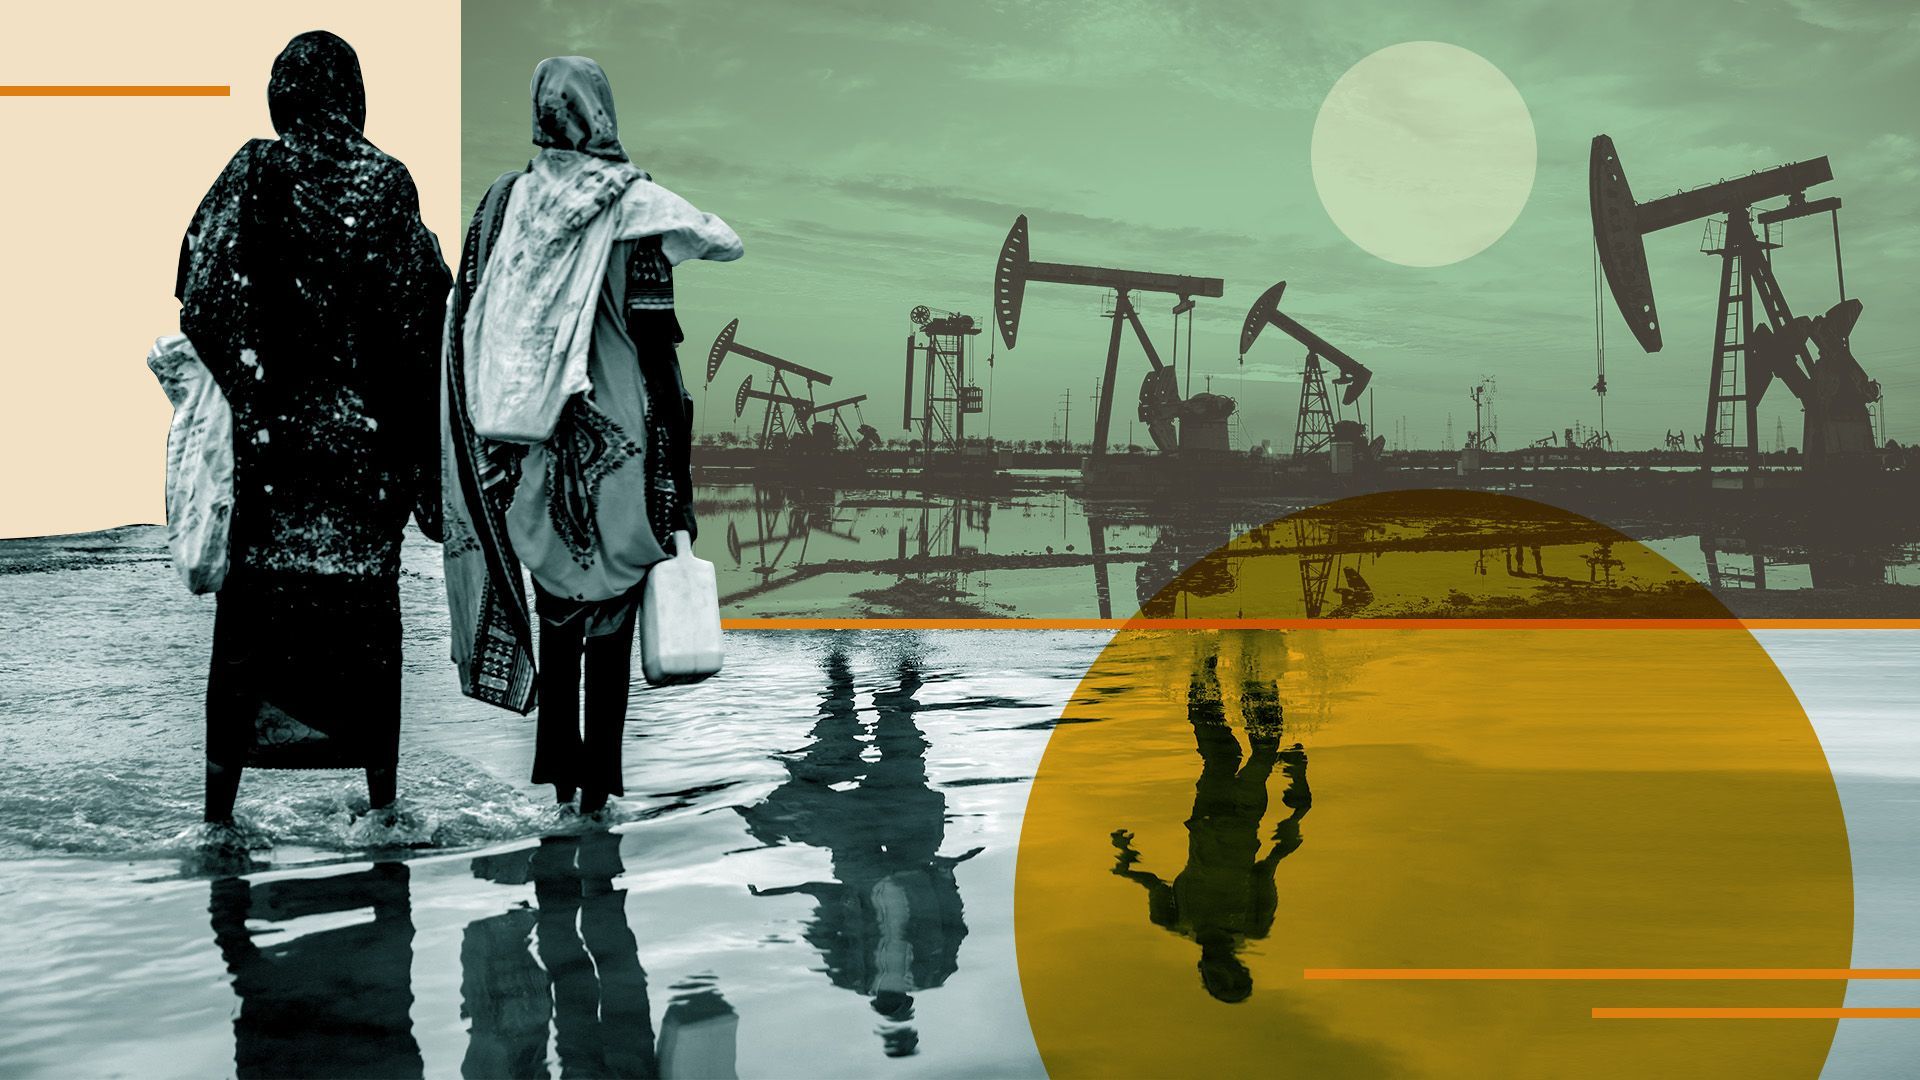 Photo illustration of two people standing in water, a field of oil rigs and abstract shapes.